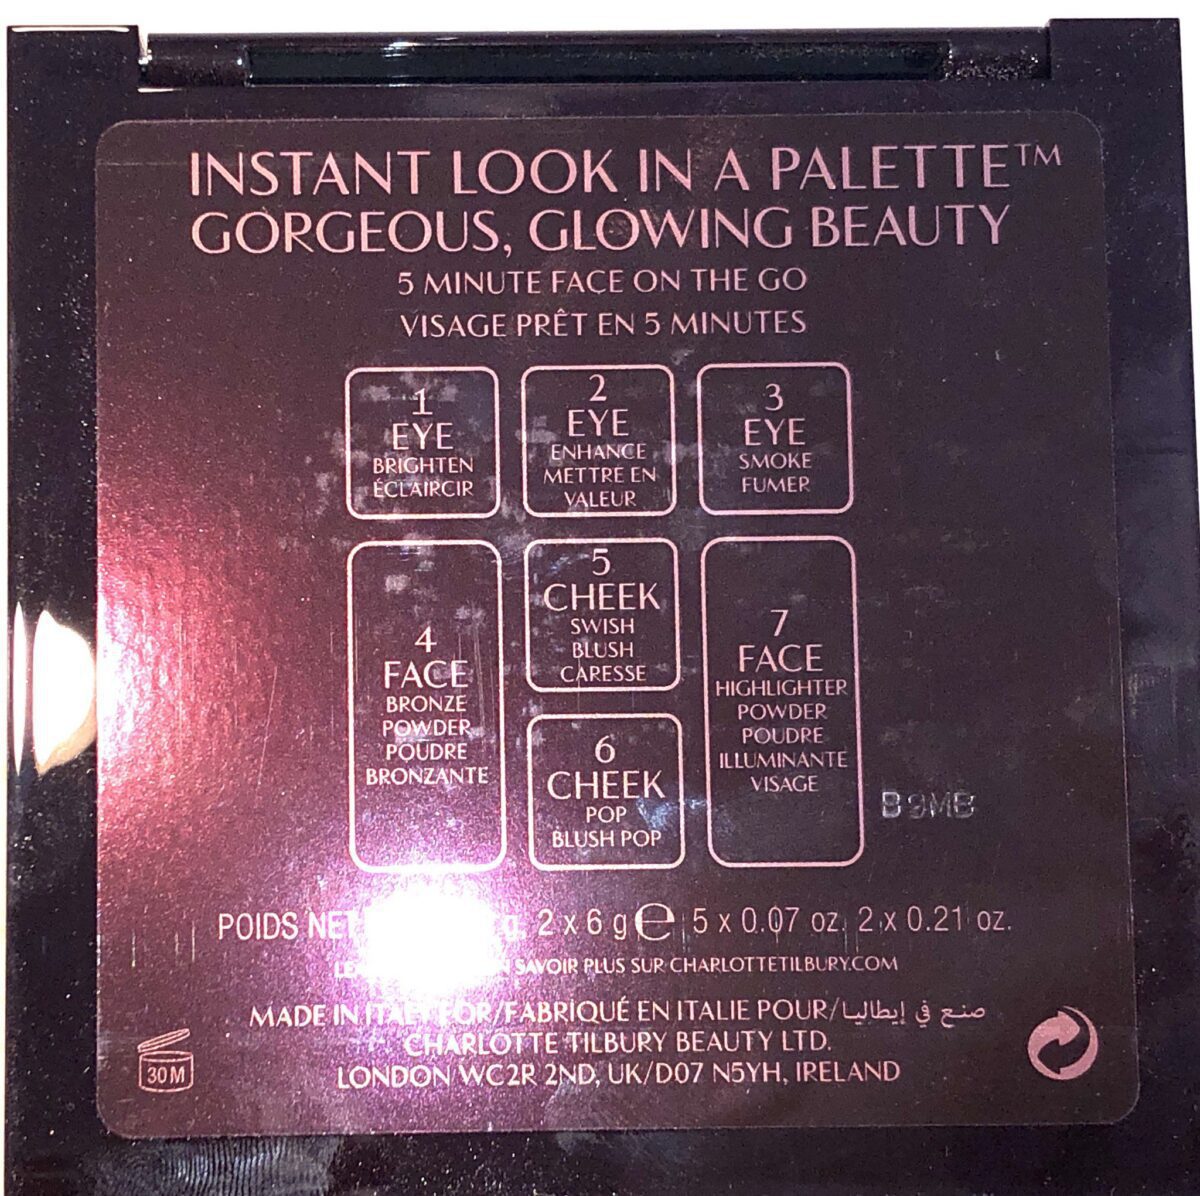 THE GORGEOUS GLOWING INSTANT FACE PALETTE SHADES ARE NUMBERED